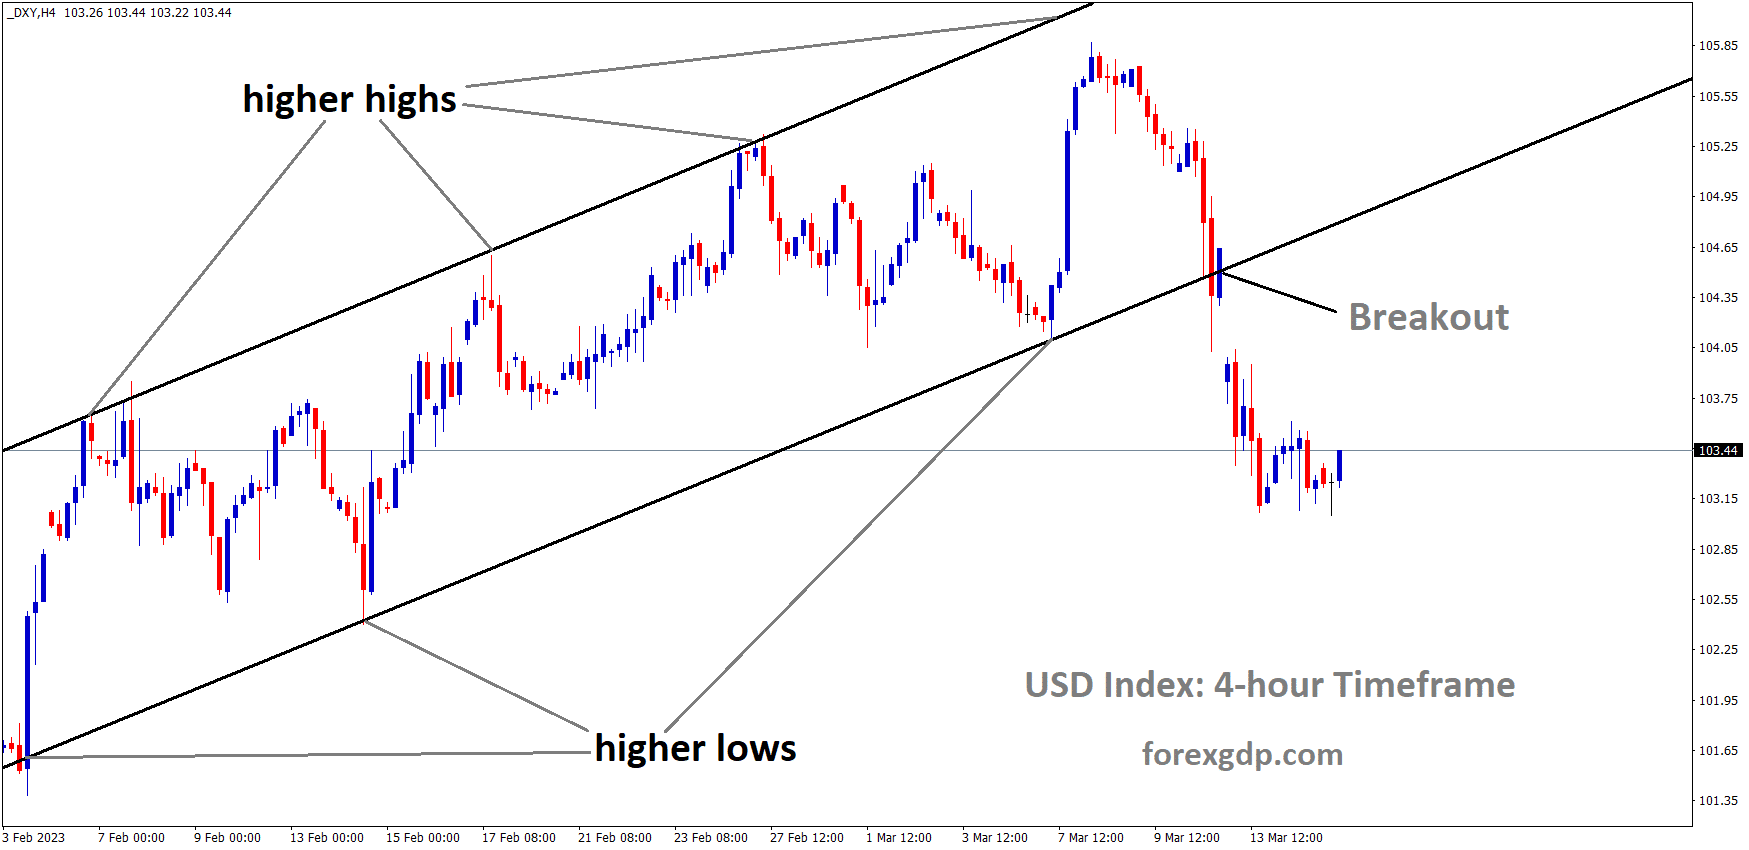 DXY Index has broken the Ascending channel in downside